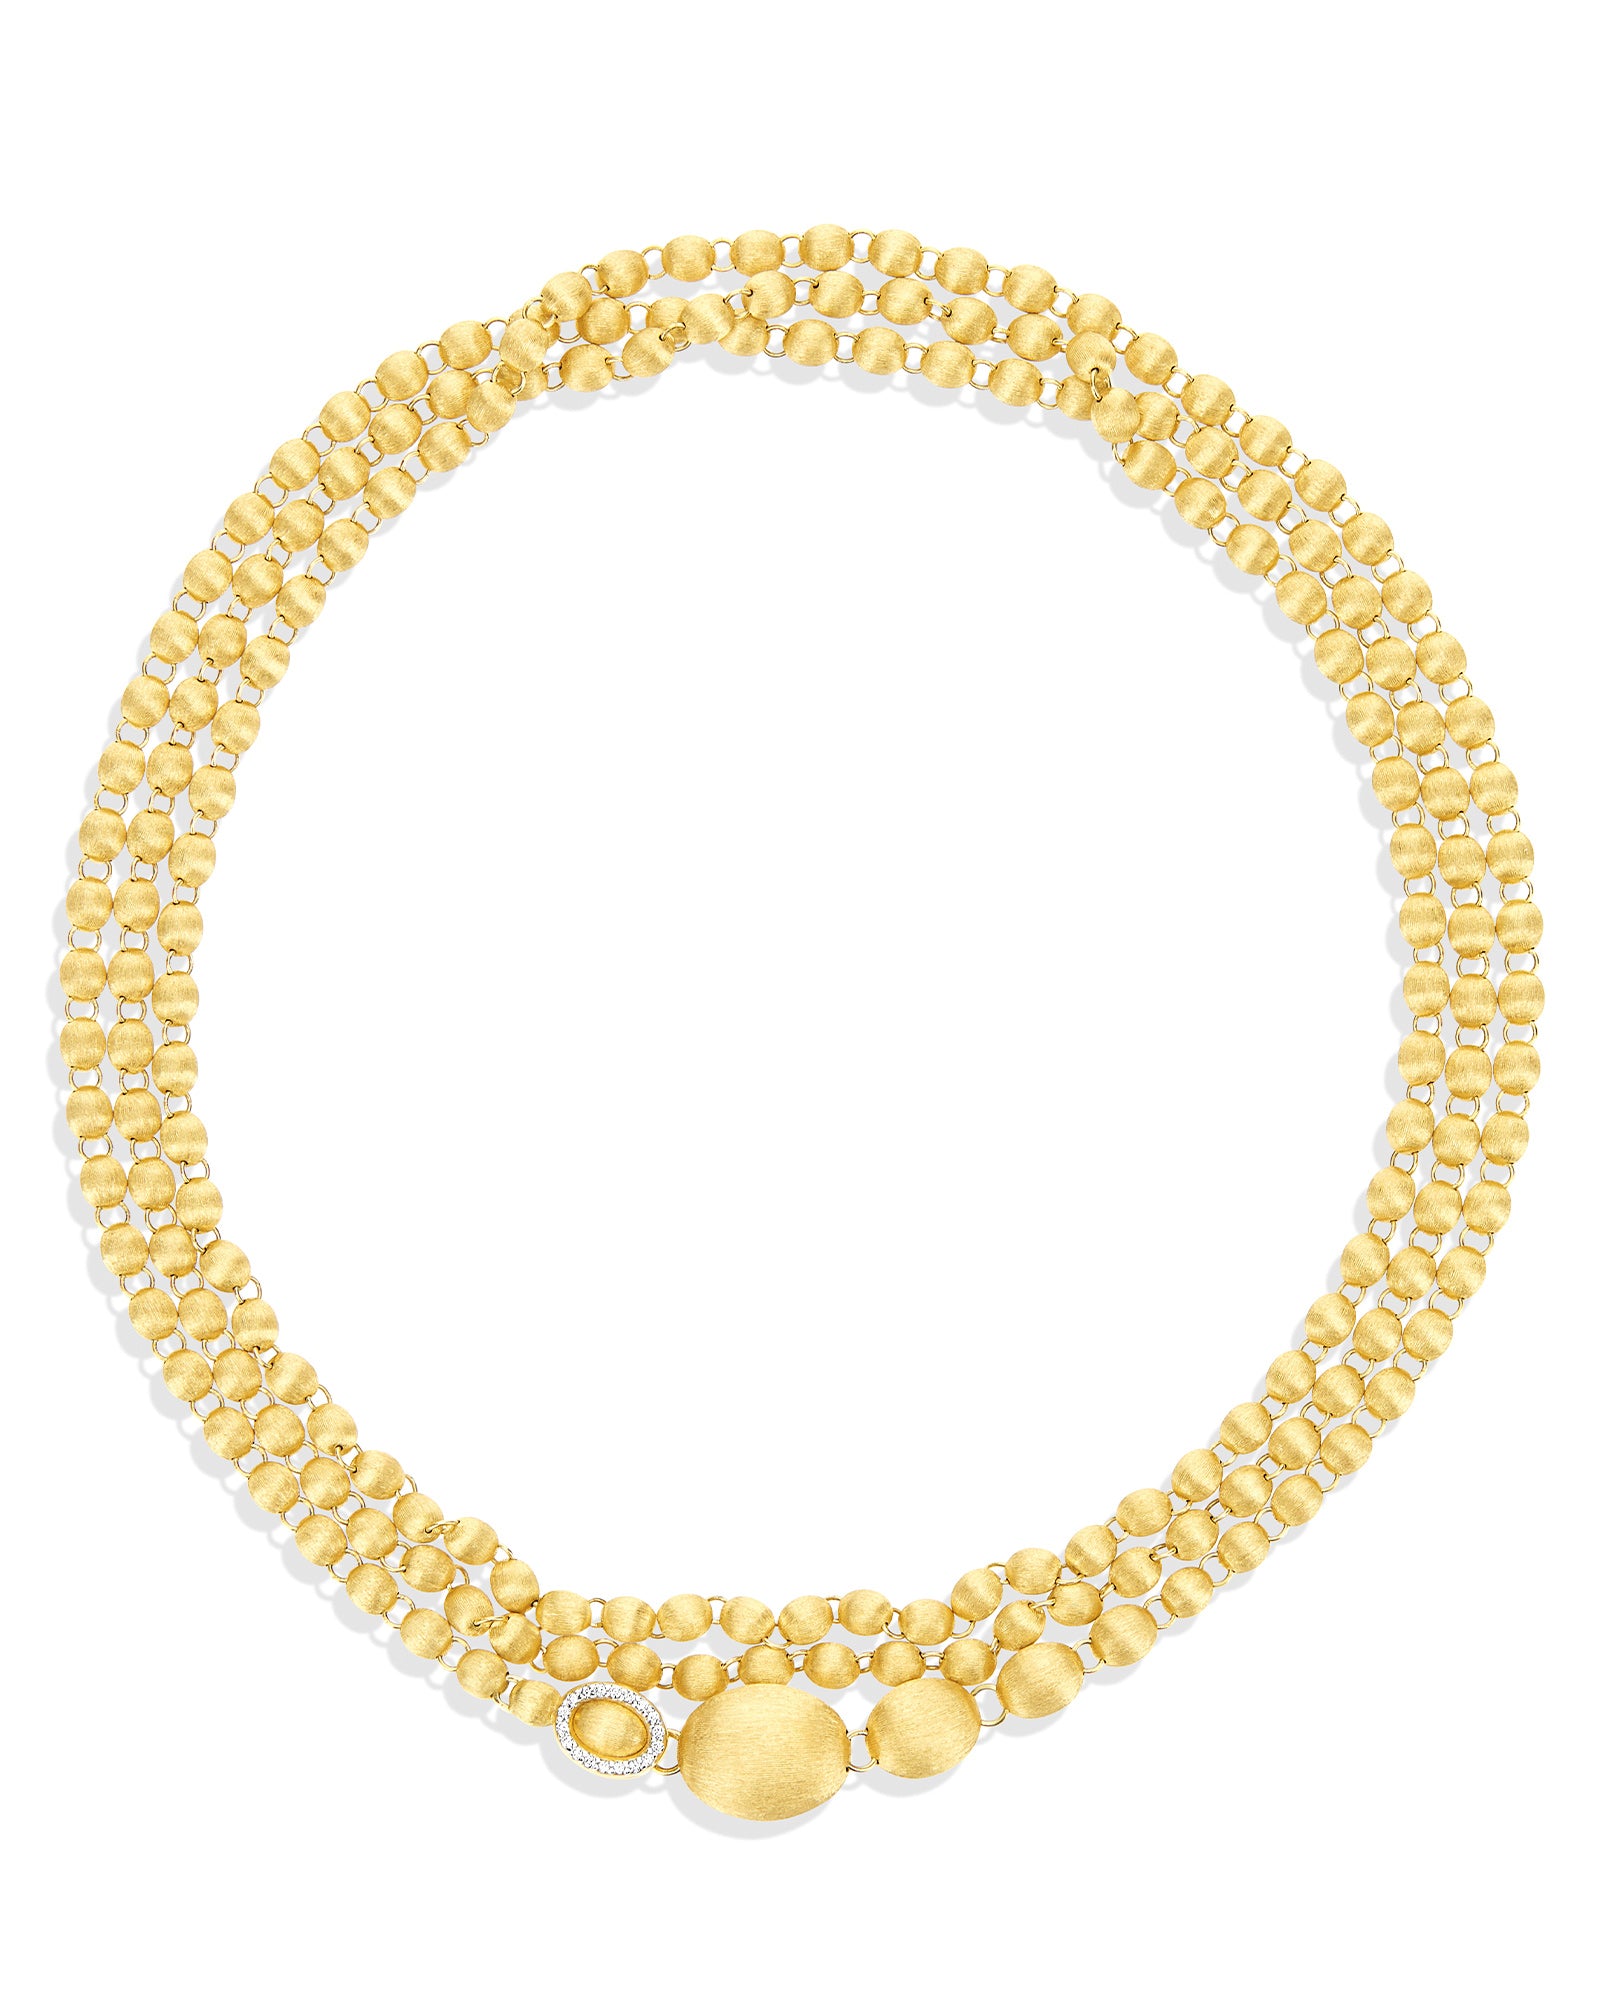 "Ivy" Slim Hand-Engraved Gold Boules and Diamonds Convertible Statement Necklace (LARGE)